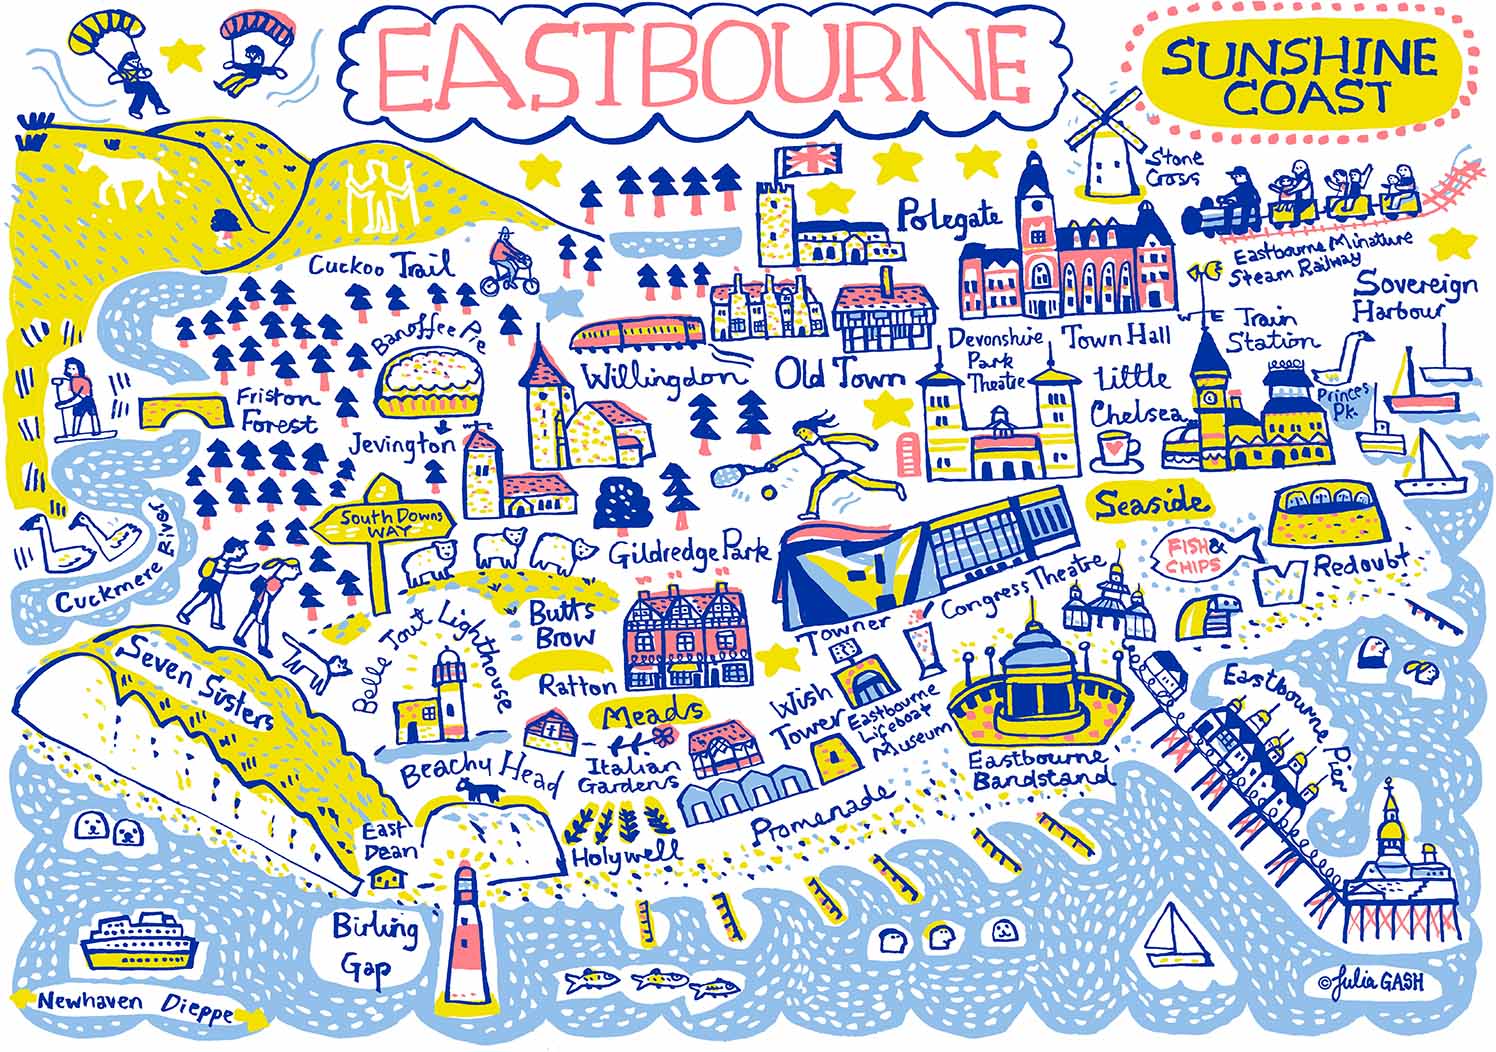 Eastbourne Greeting Cards - Pack of 6